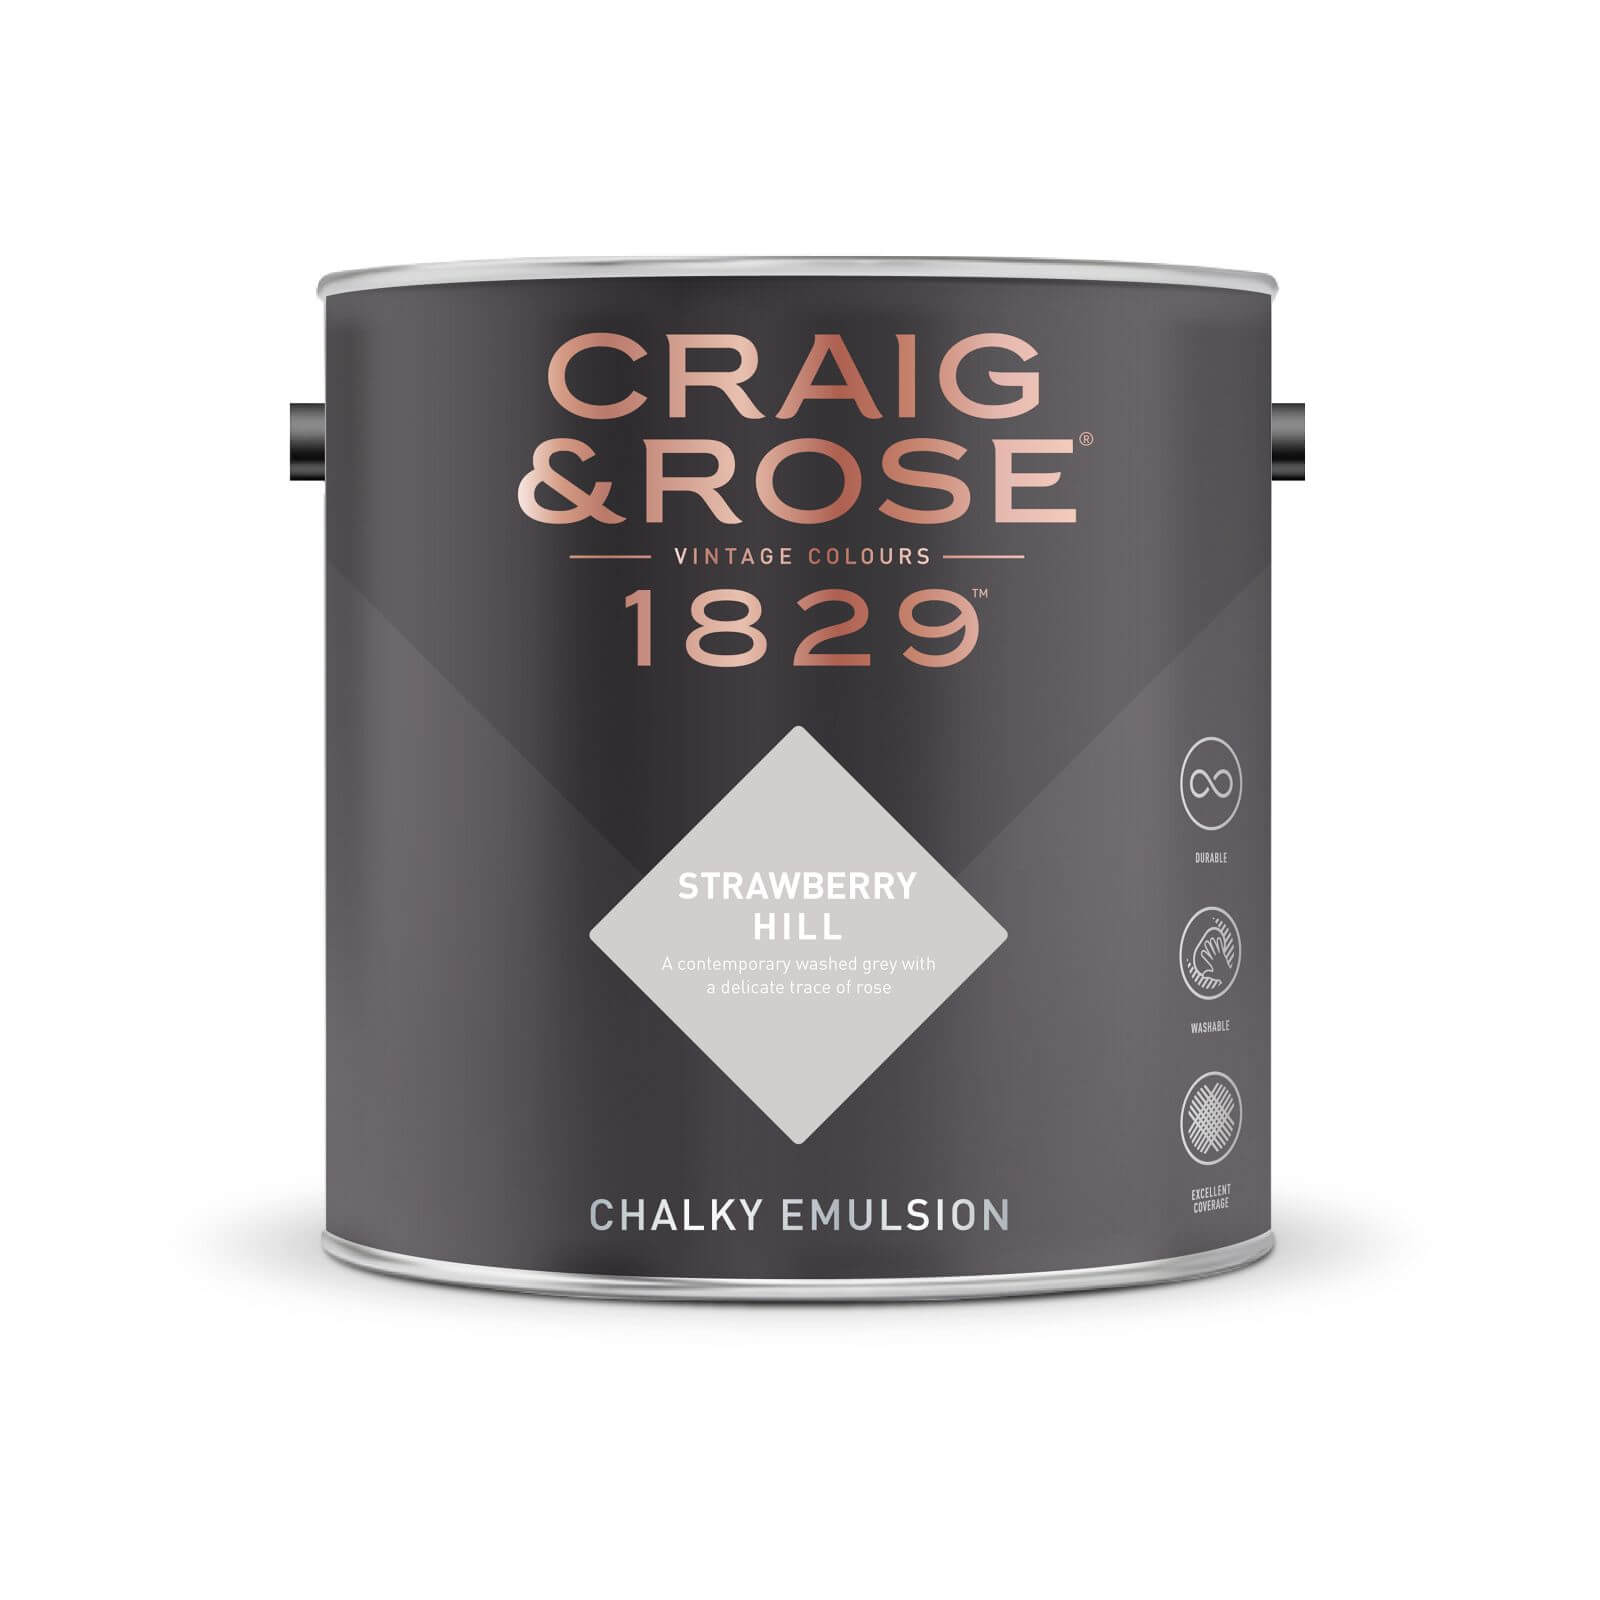 Craig & Rose 1829 Chalky Emulsion Paint Strawberry Hill - 5L